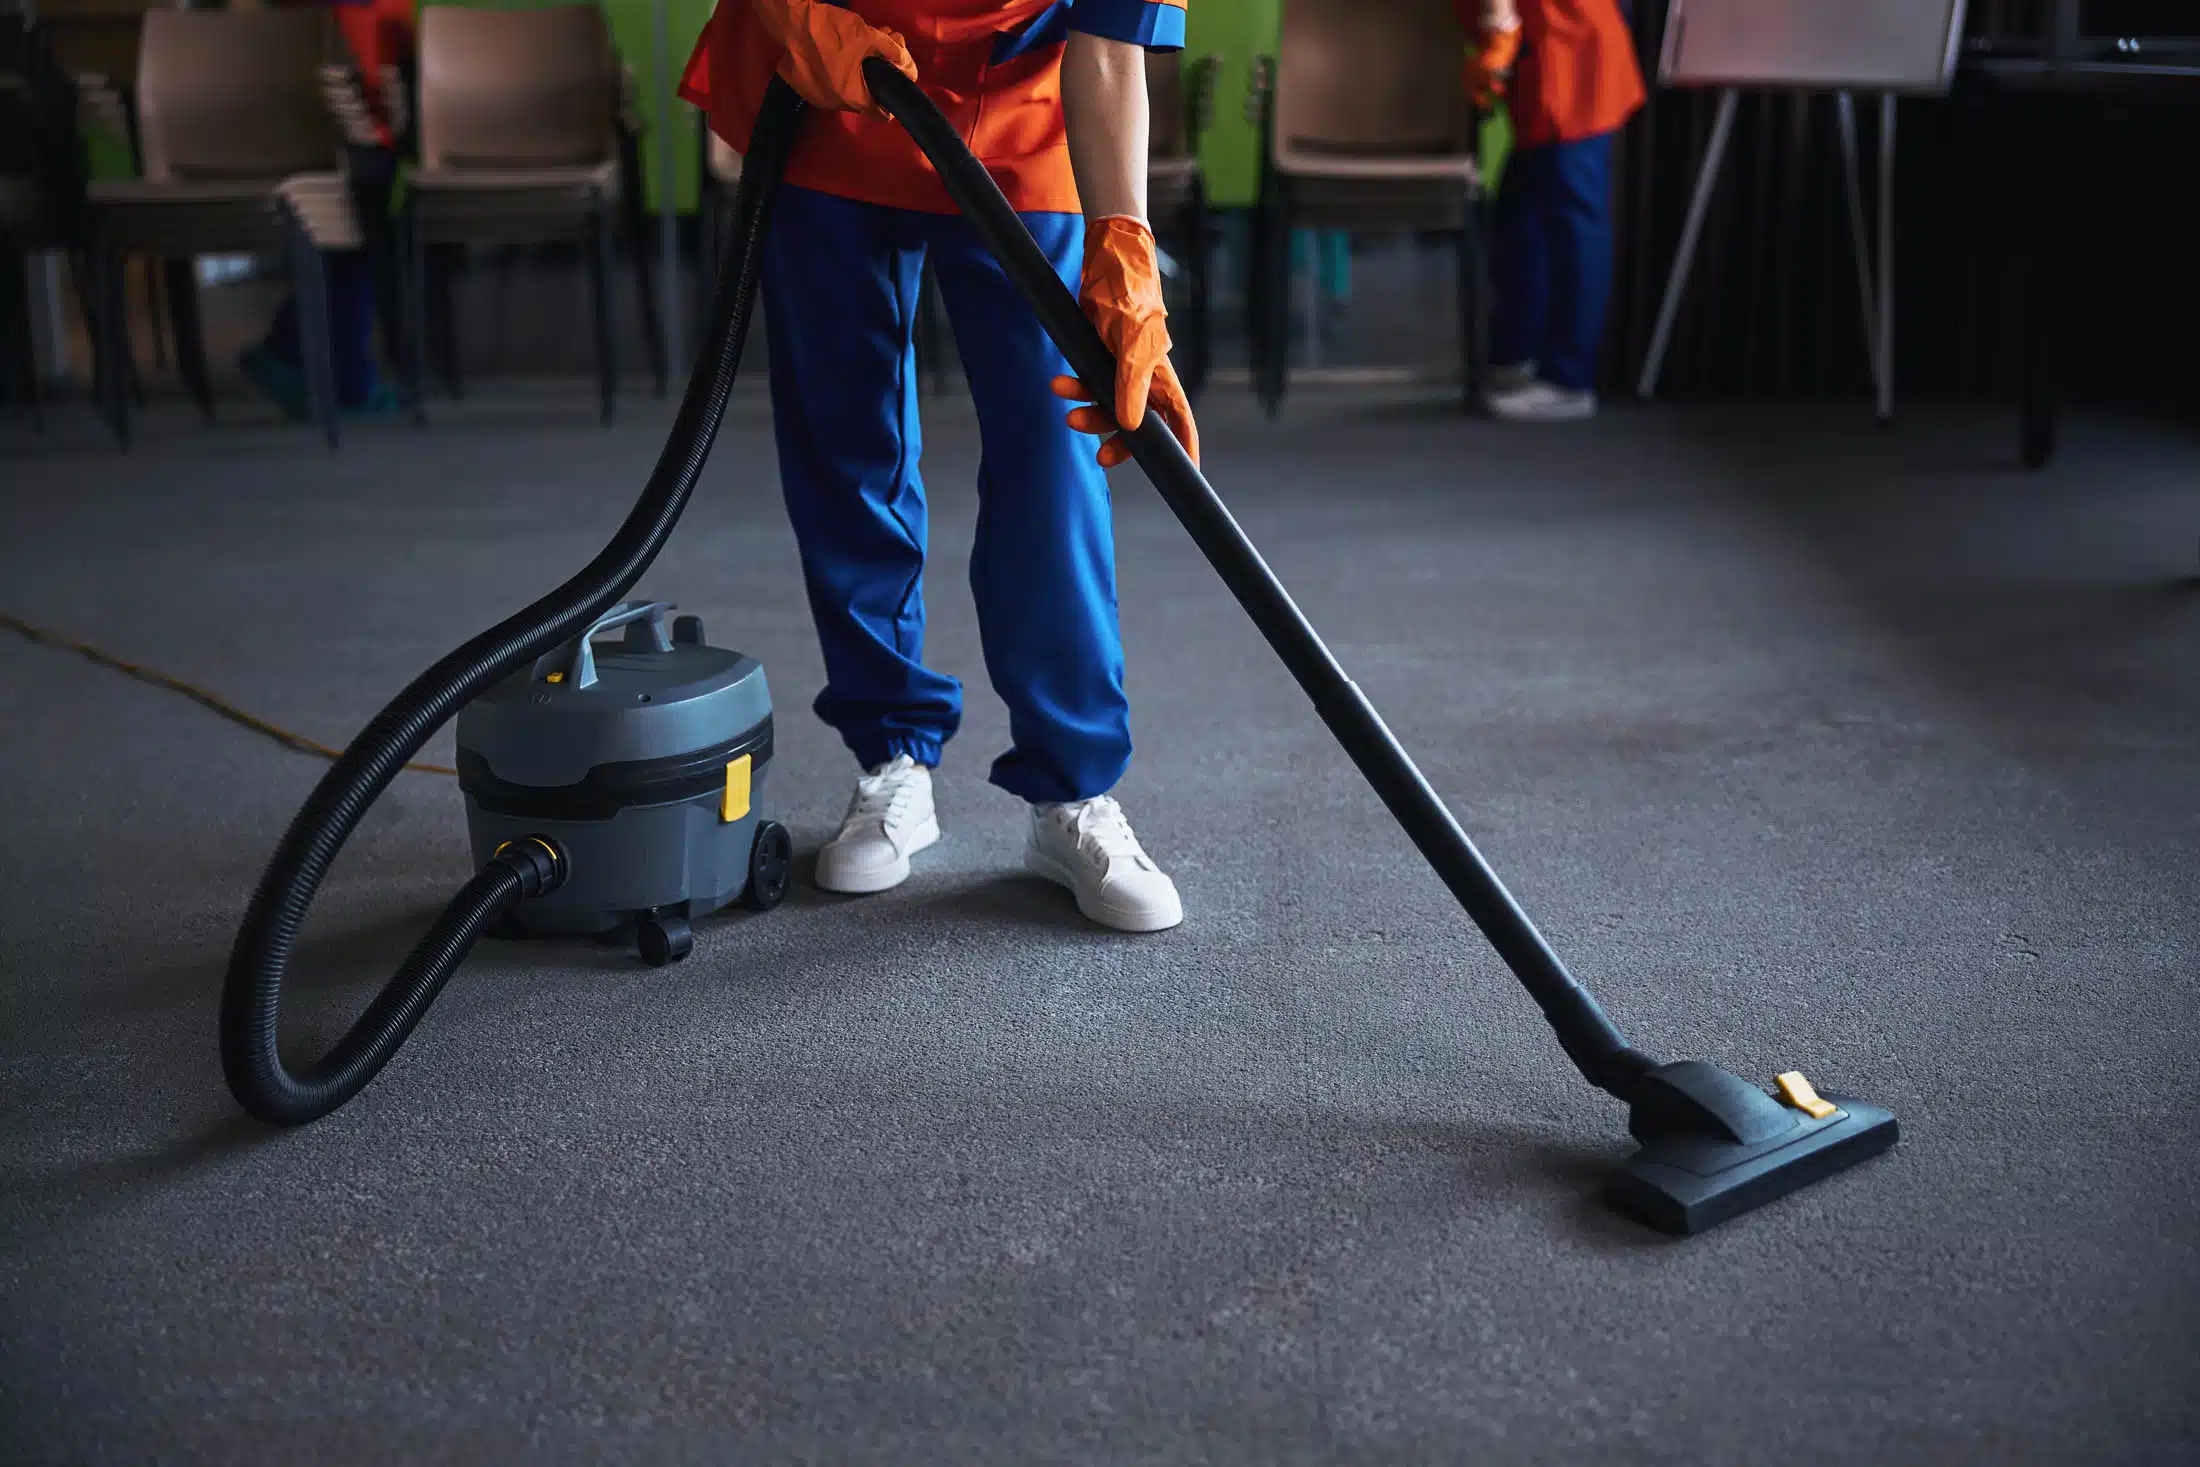 Person using a vacuum cleaner in a commercial facility